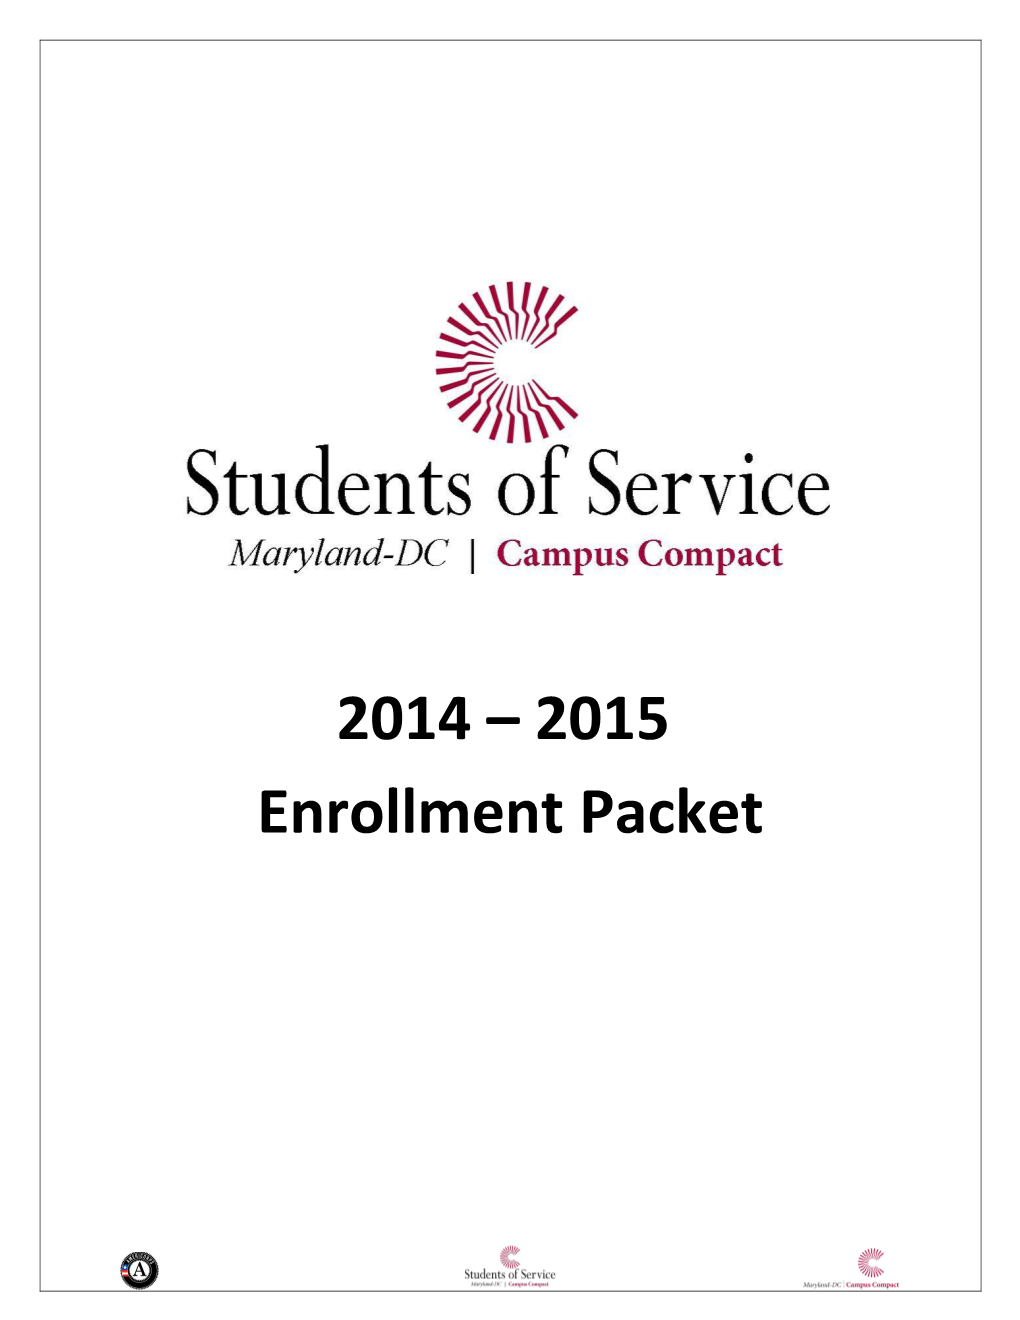 Official Enrollment Begins AFTER a Member Submits a Complete Enrollment Packet, Including